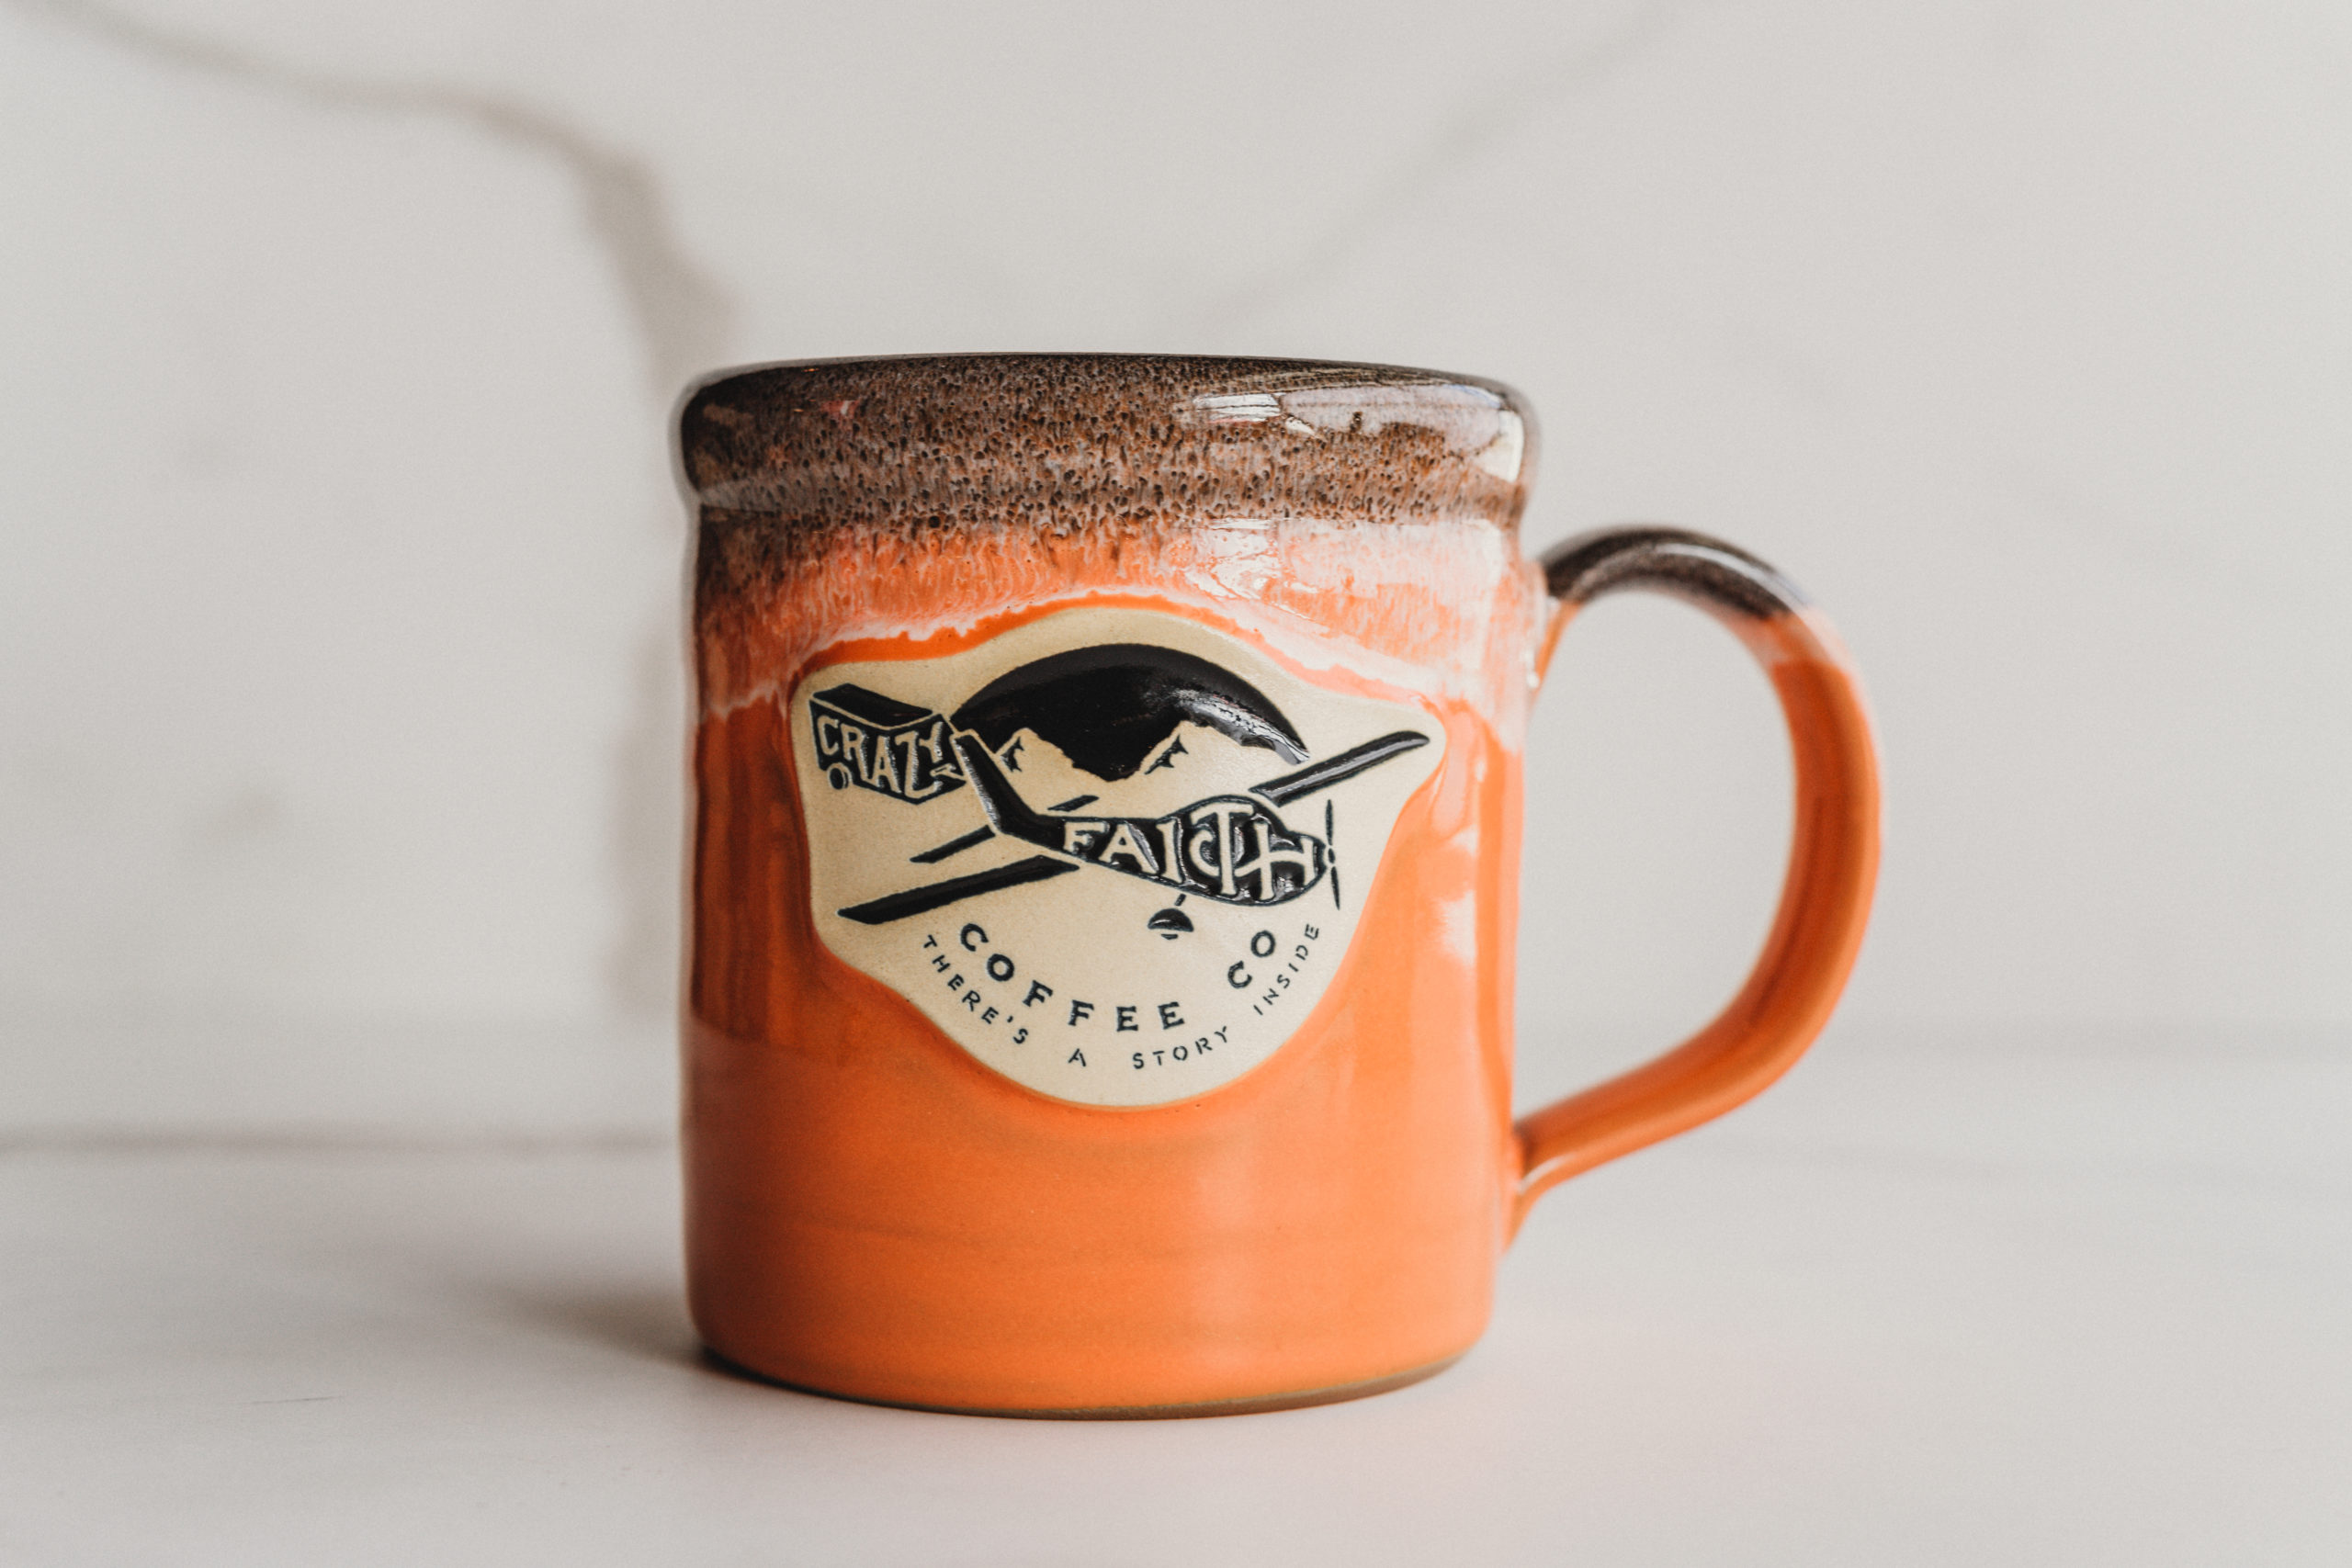 Orange and brown coffee cup